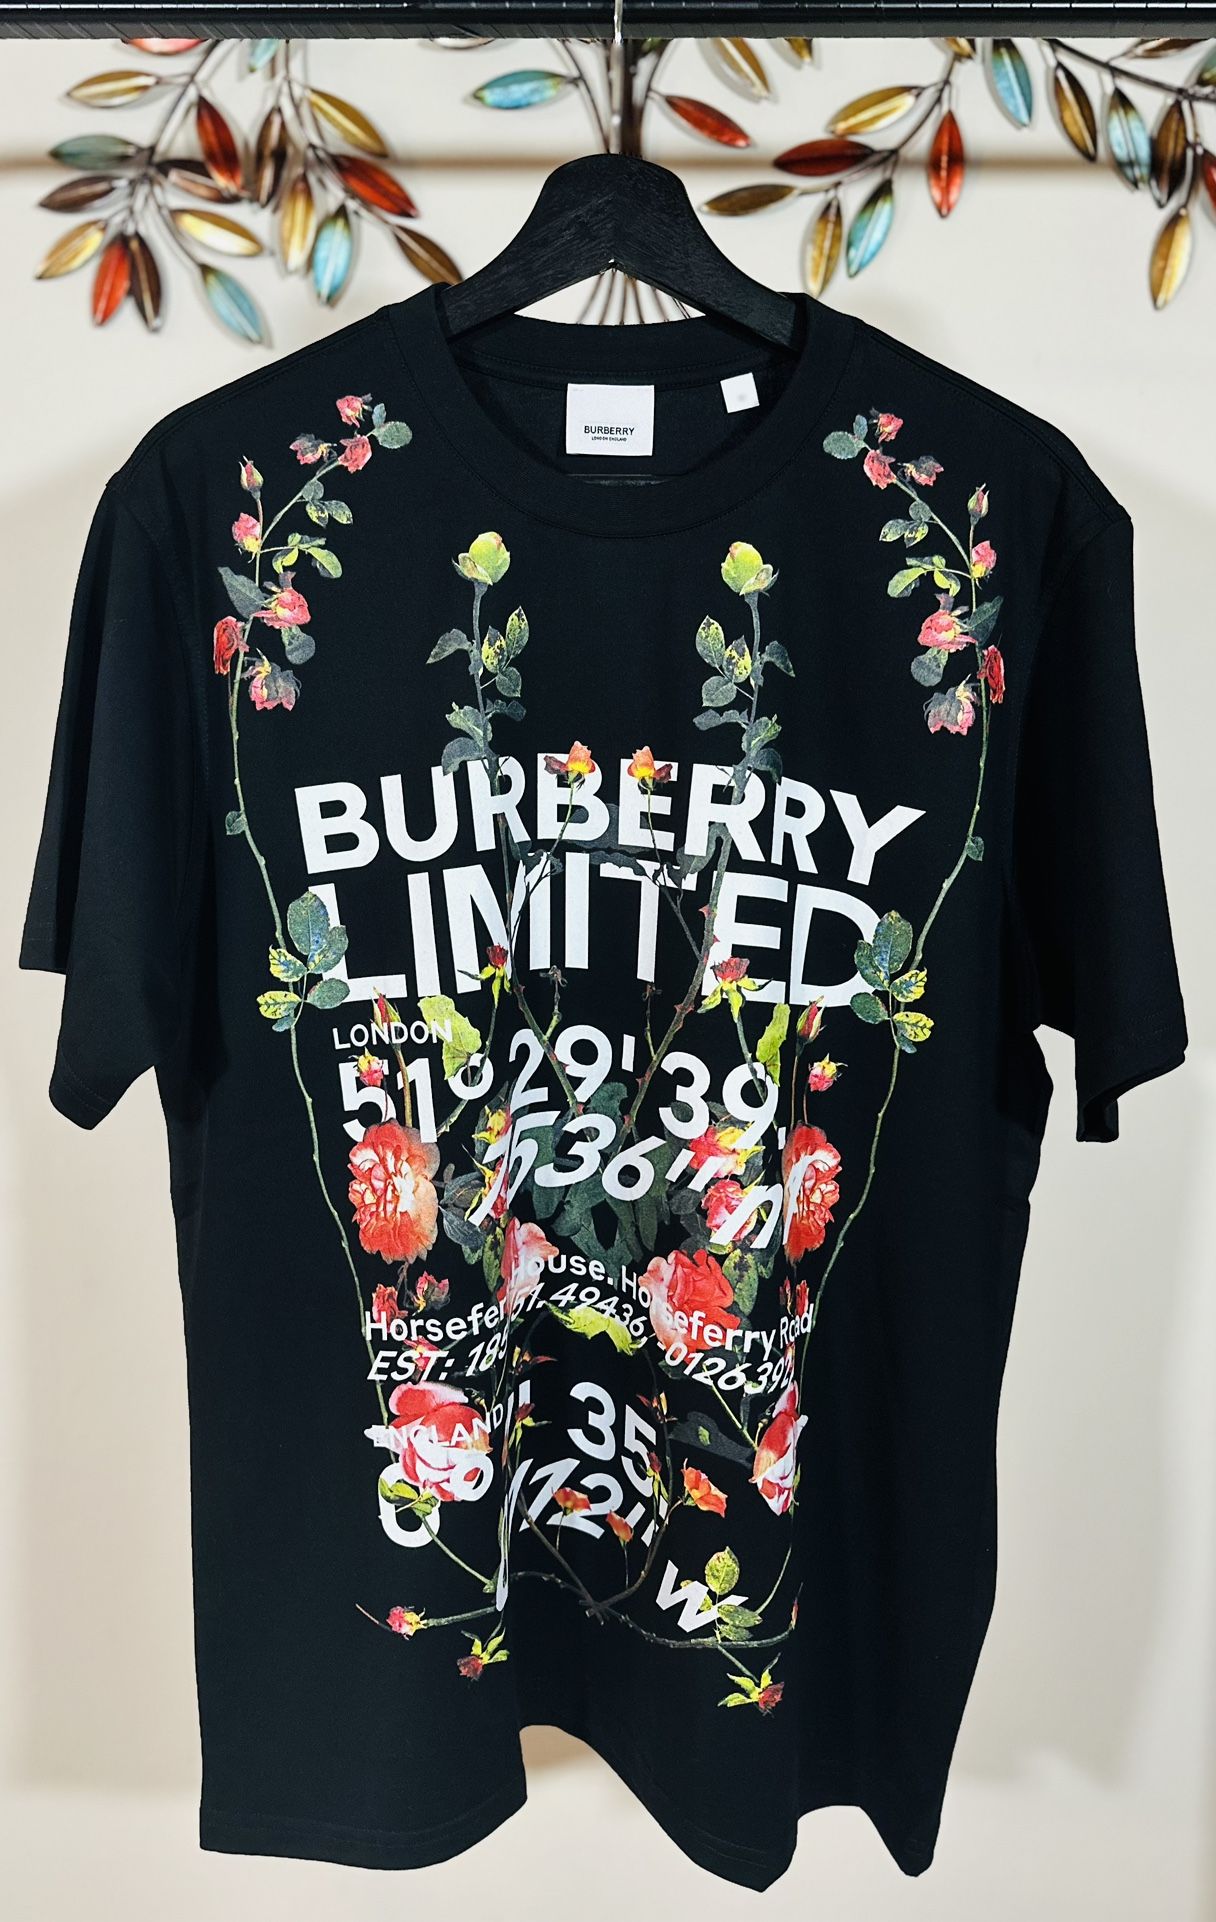  BURBERRY Munlow Flower Graphic T-shirt SS24, Visit Our Profile For More Items Available…